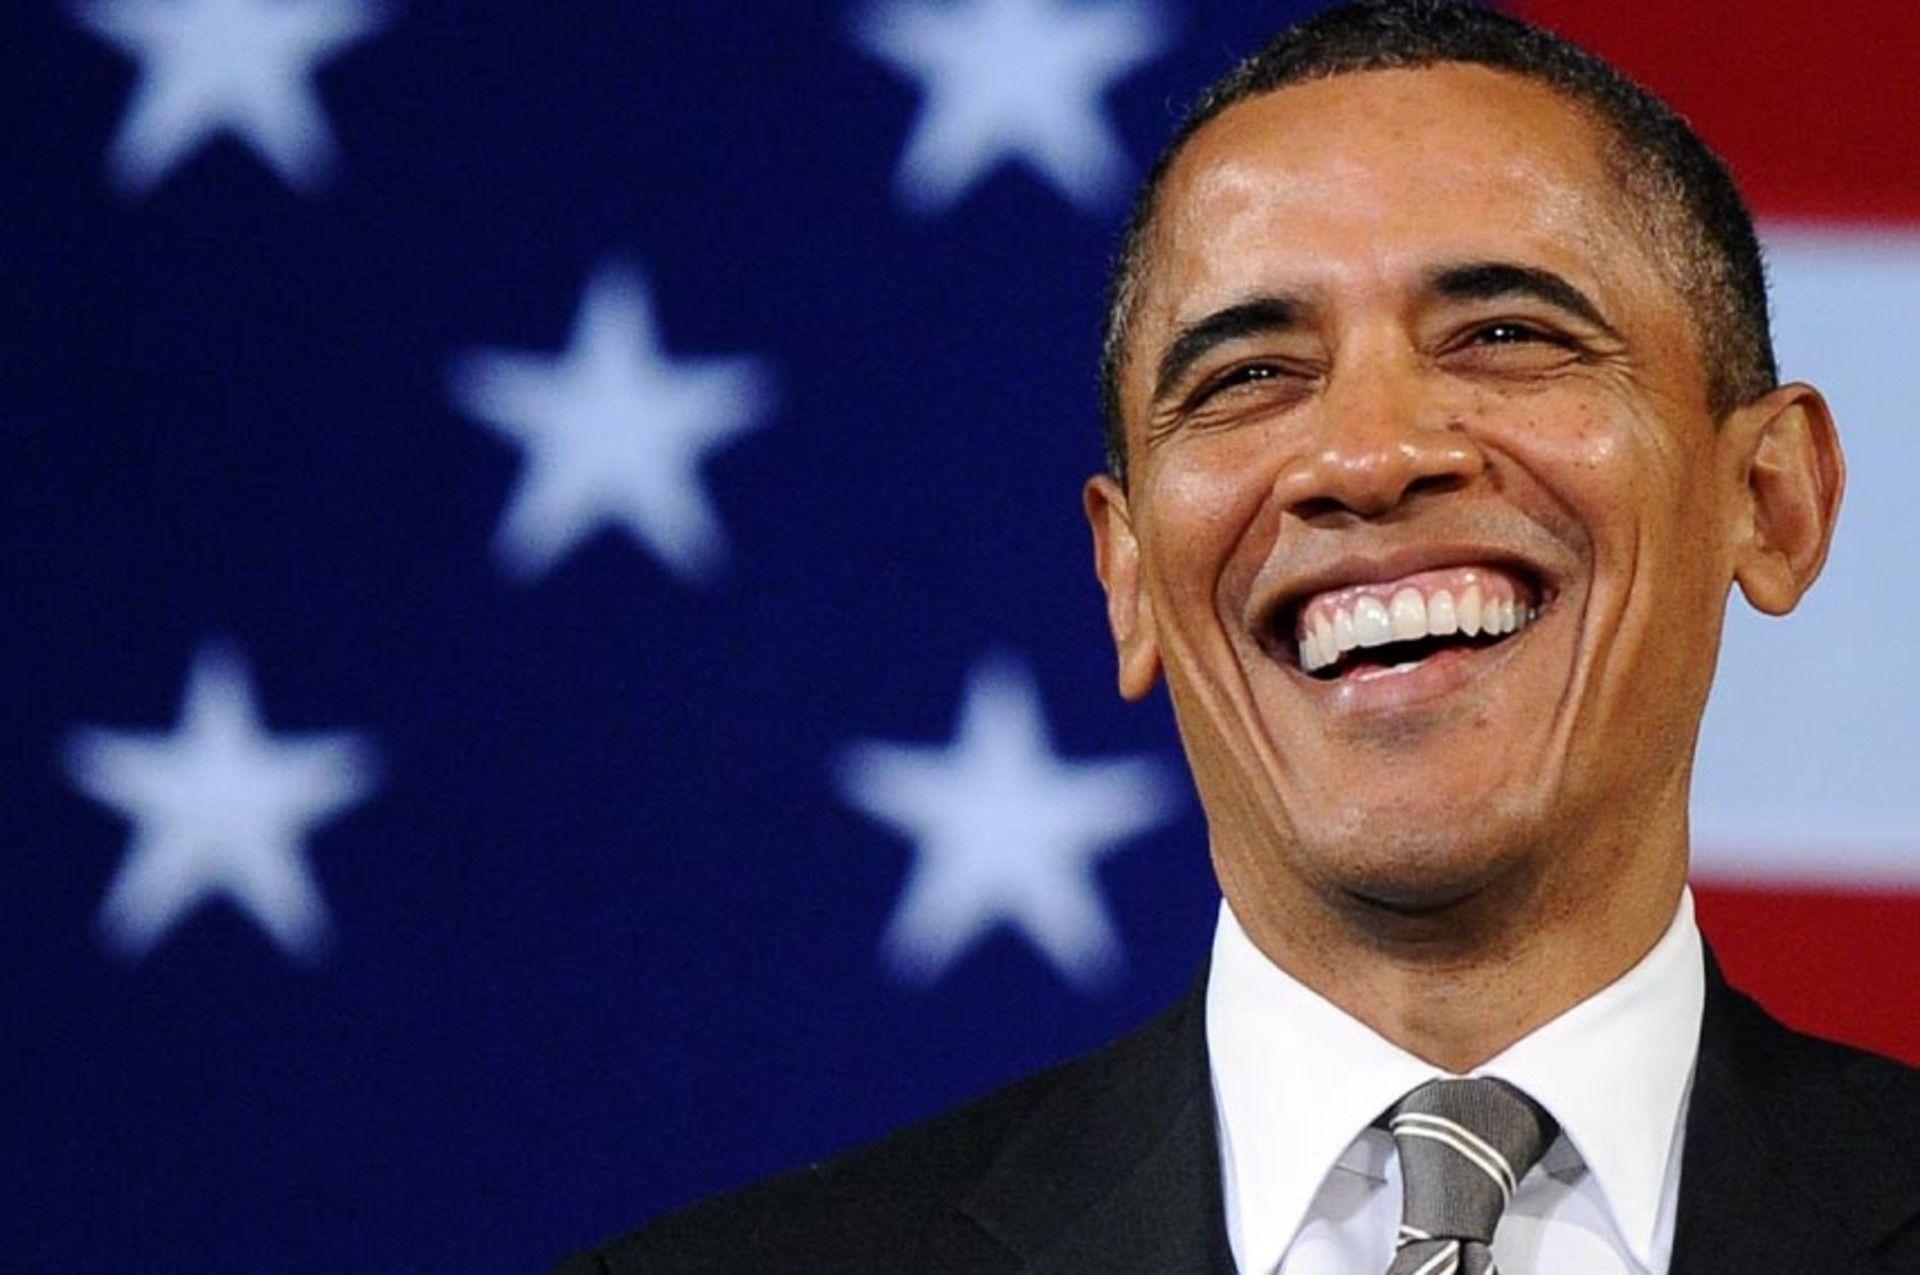 Smiling Face of Popular Politician Barack Obama HD Photo. HD Famous